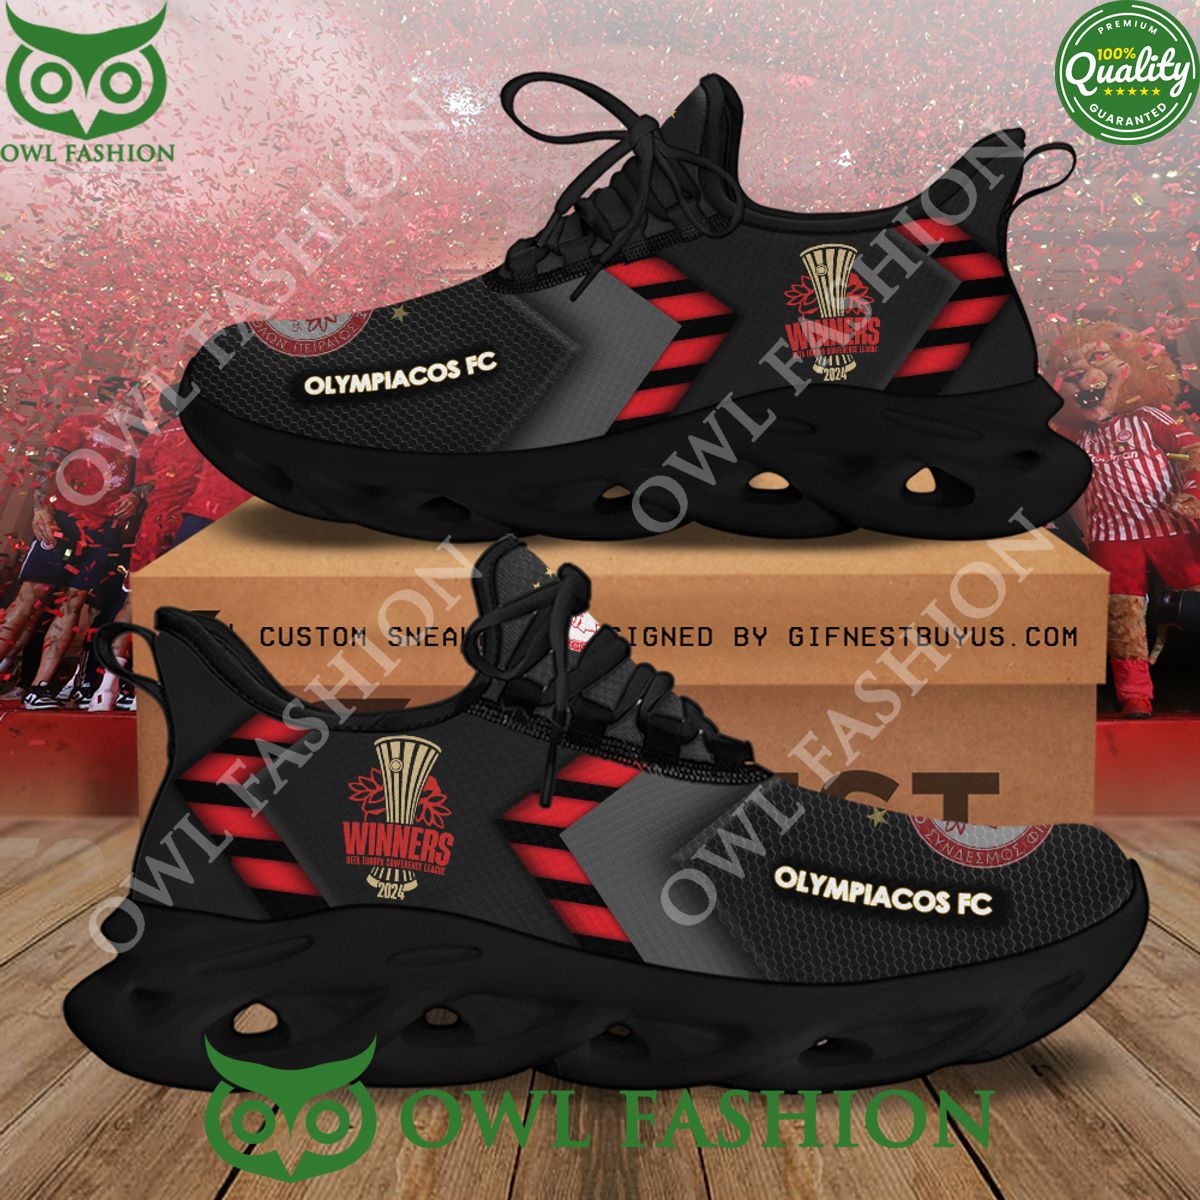 olympiacos fc europa conference league 2024 max soul sneaker 1 dkH1c.jpg